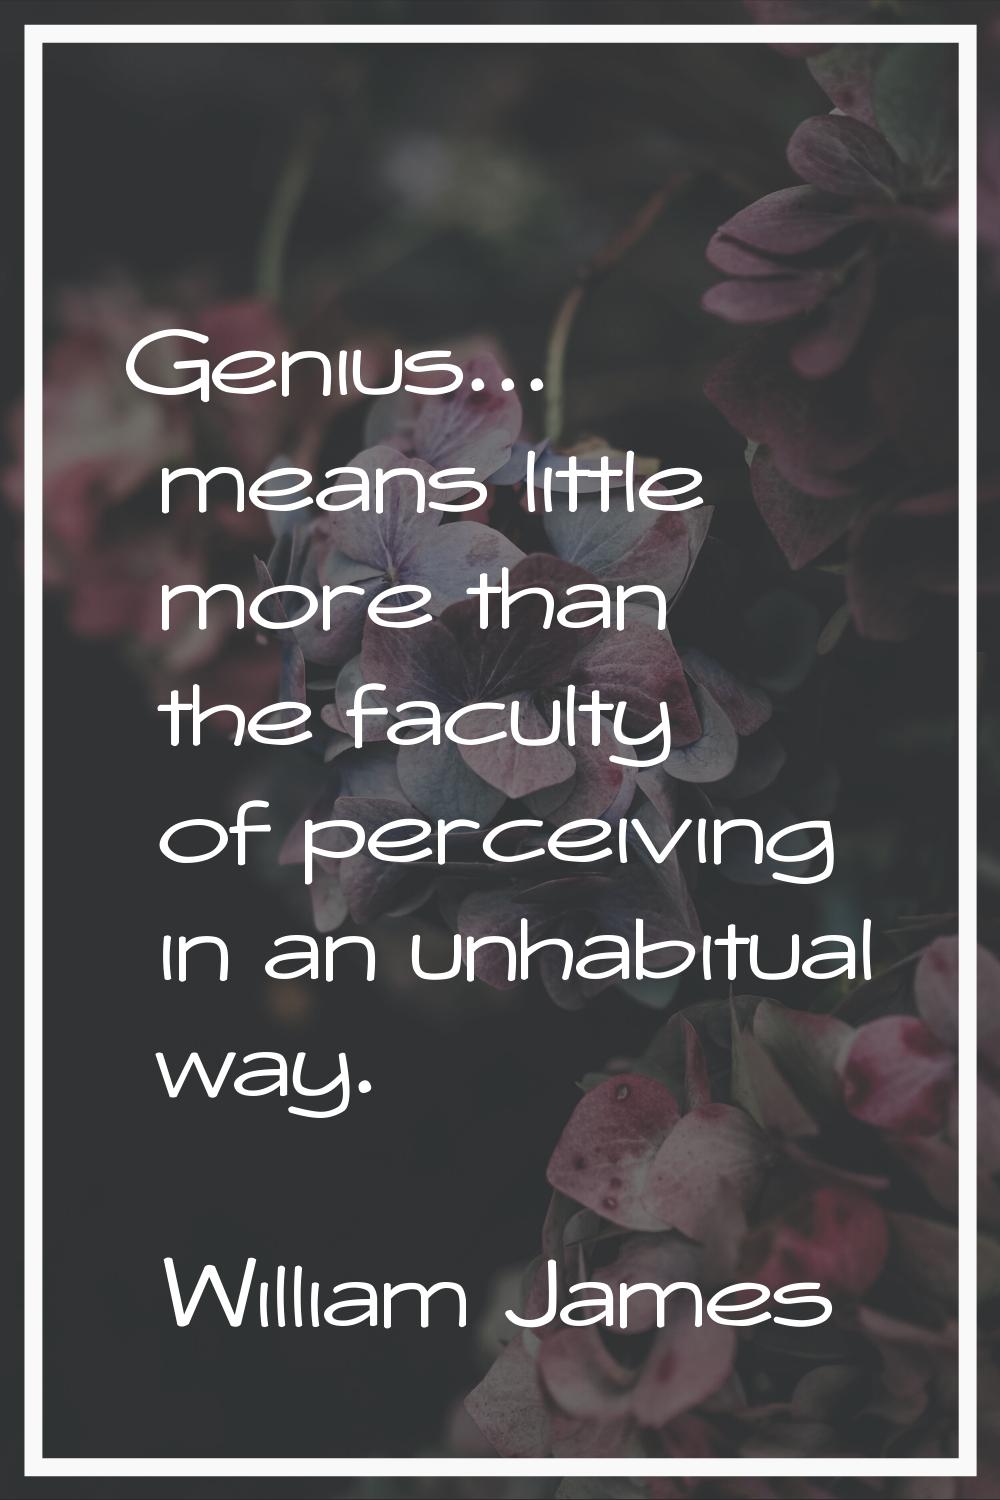 Genius... means little more than the faculty of perceiving in an unhabitual way.